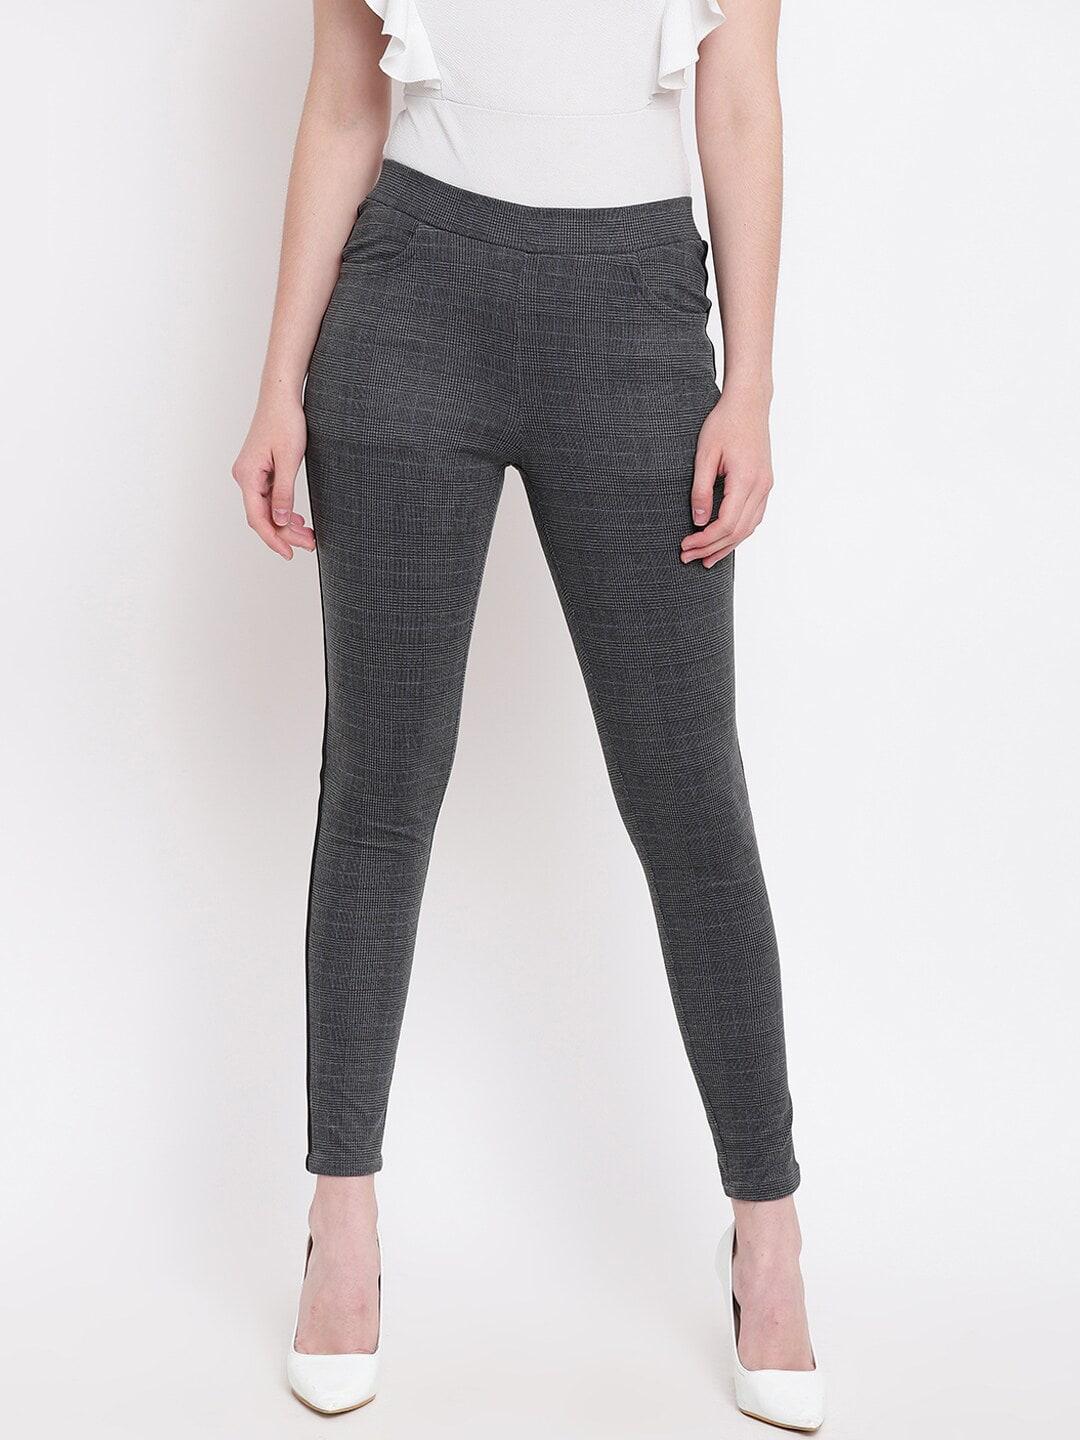 be-indi-women-black-slim-fit-checked-jeggings